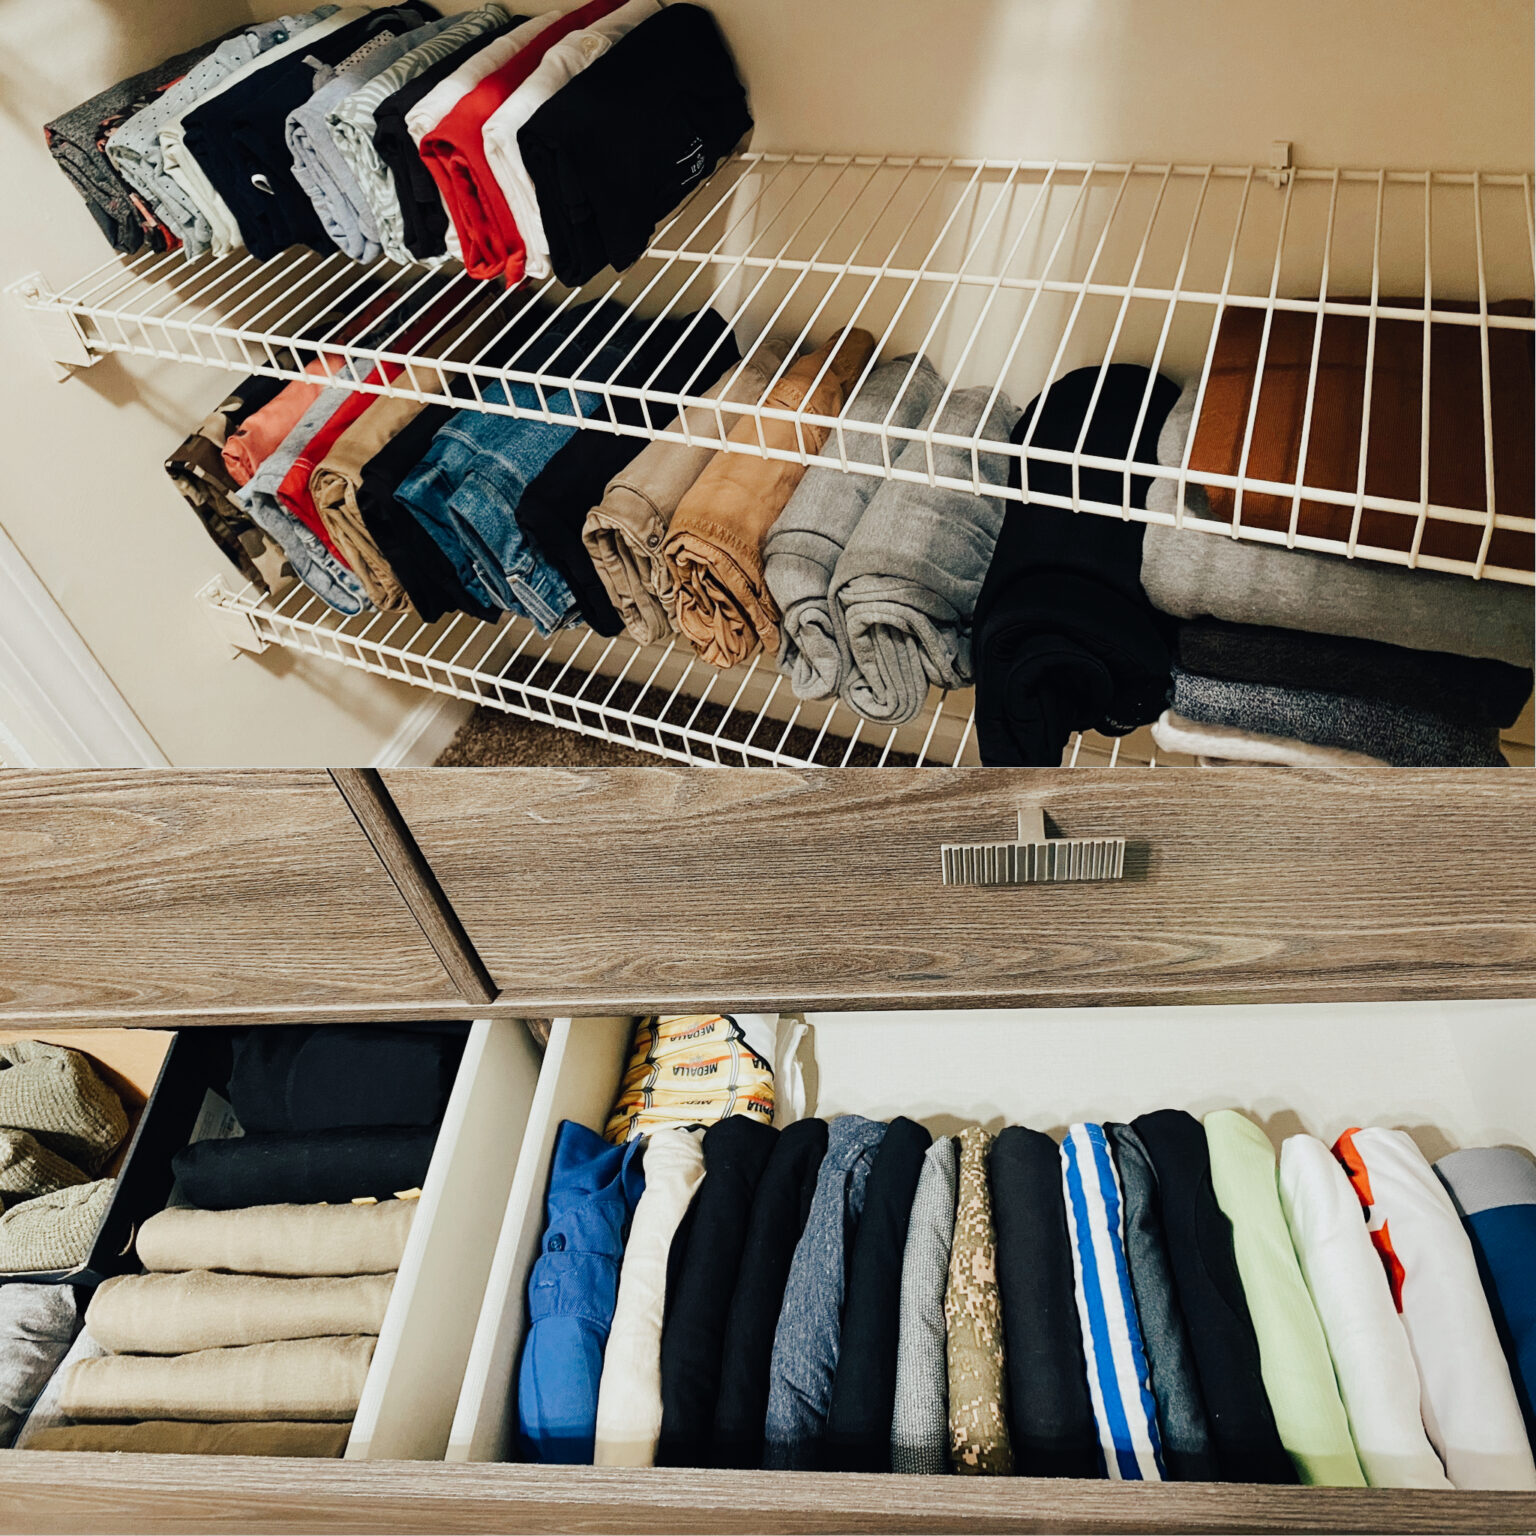 How To Organize Your Home With The KonMari Method - My Mind Talks